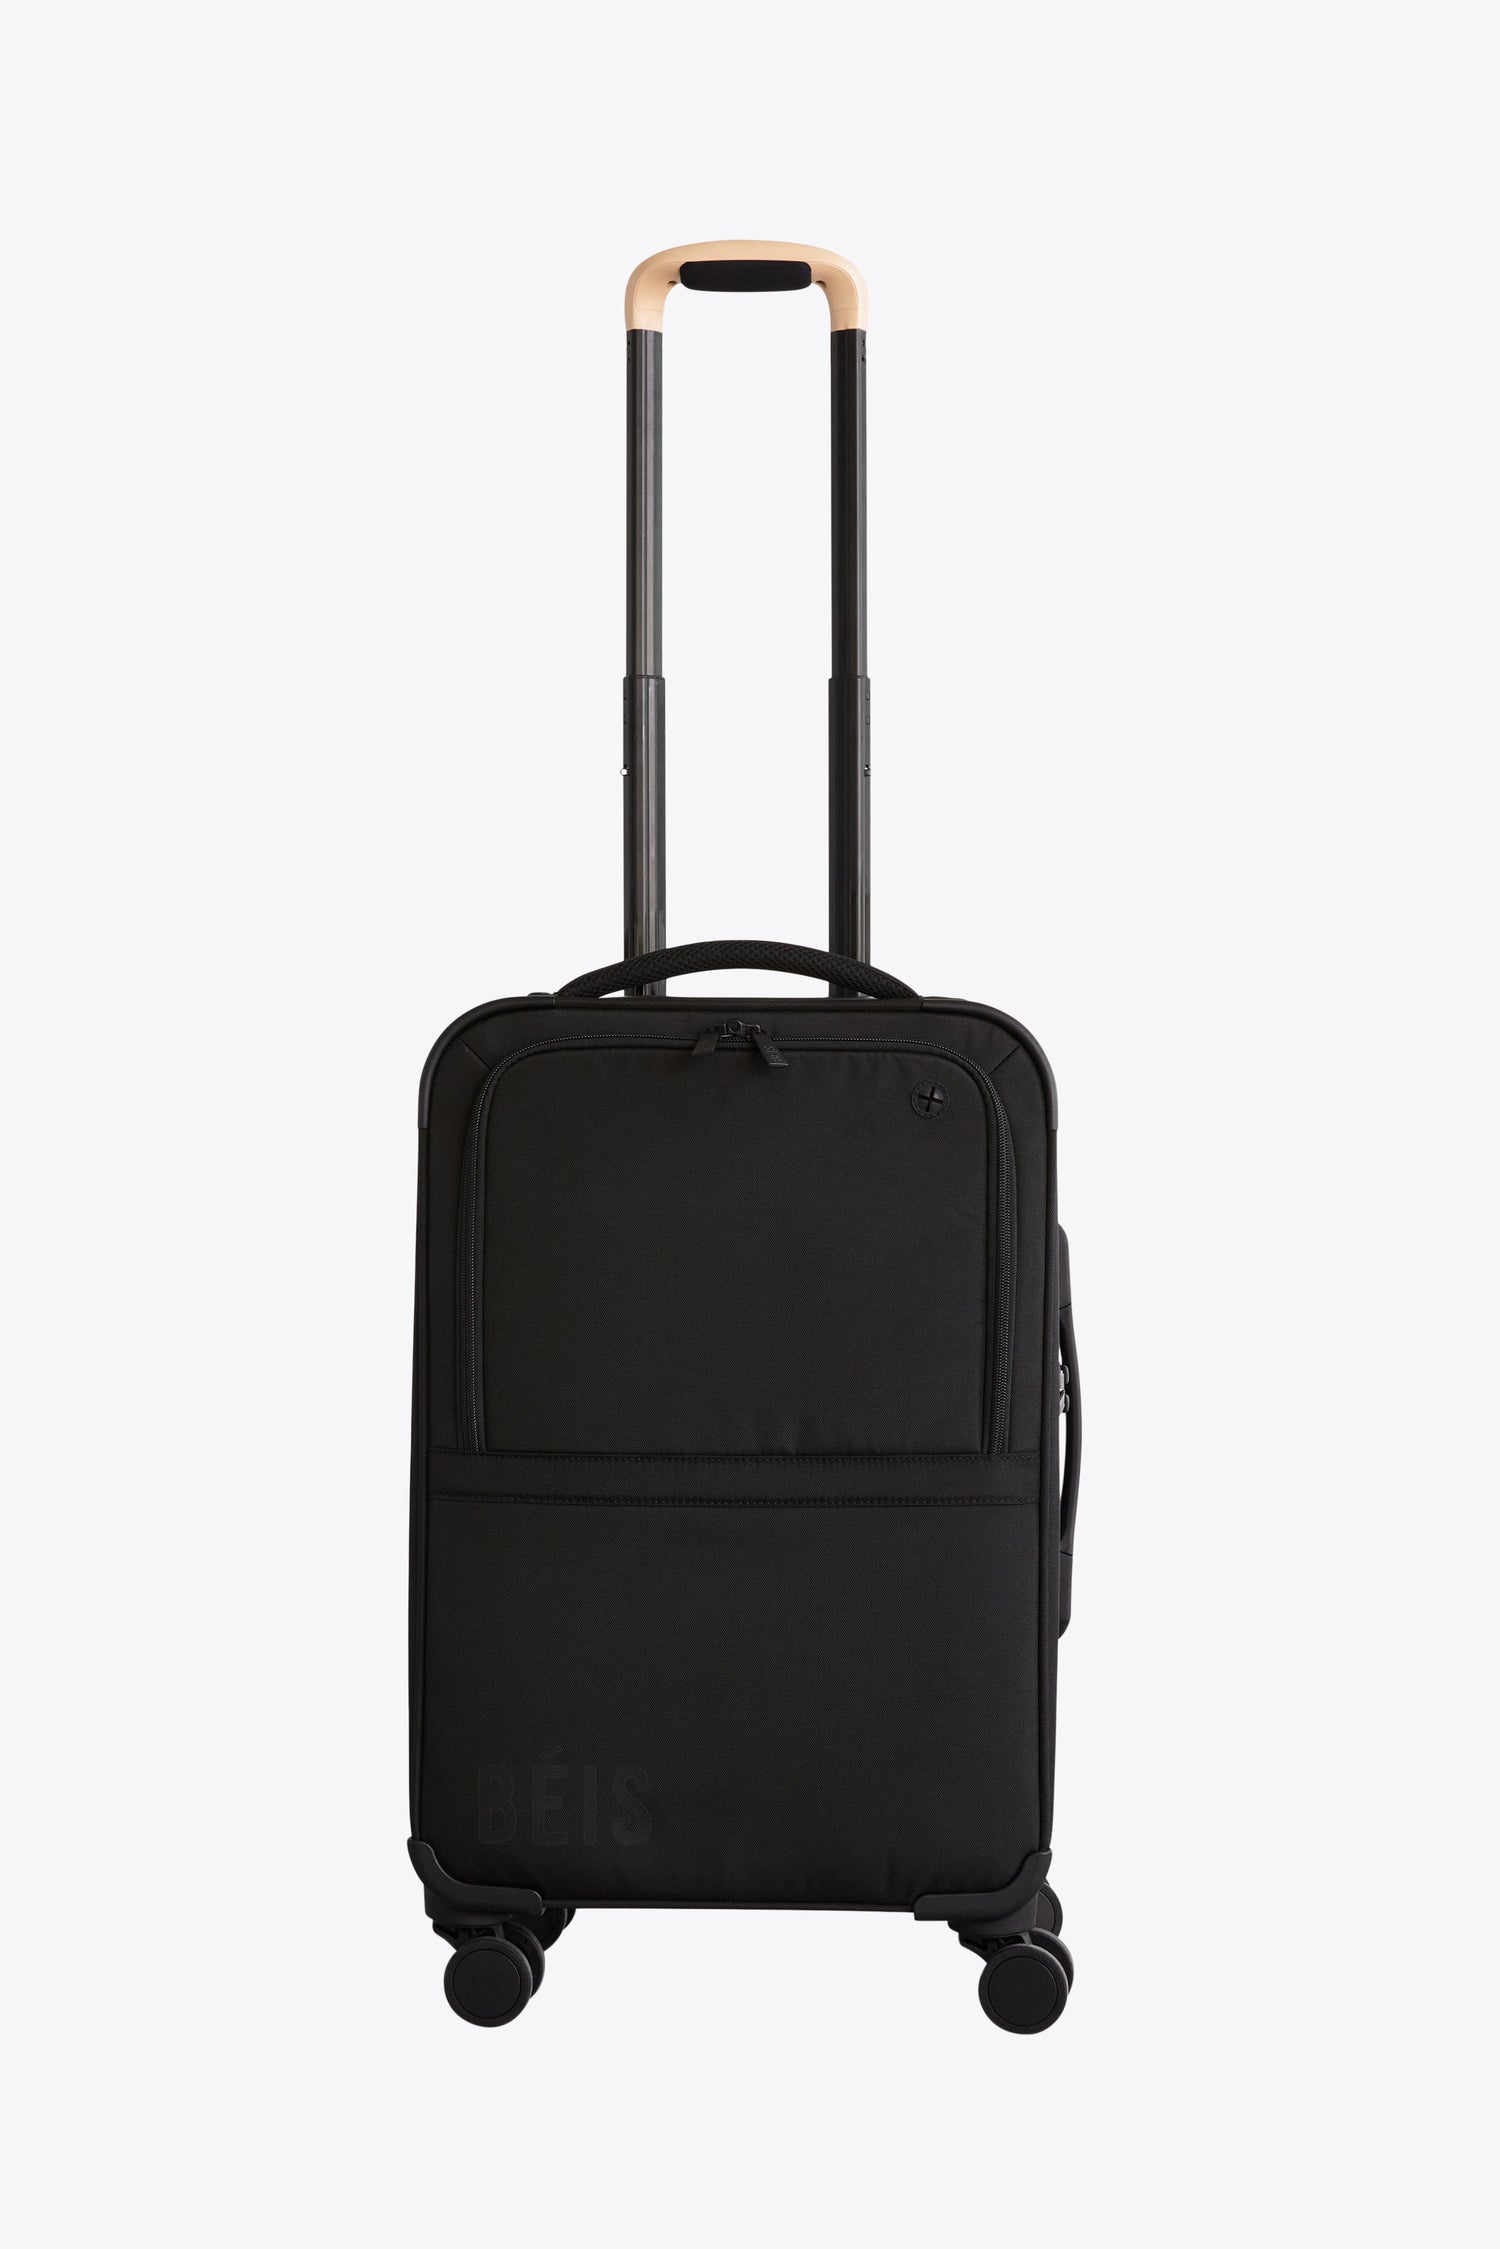 collapsible luggage black